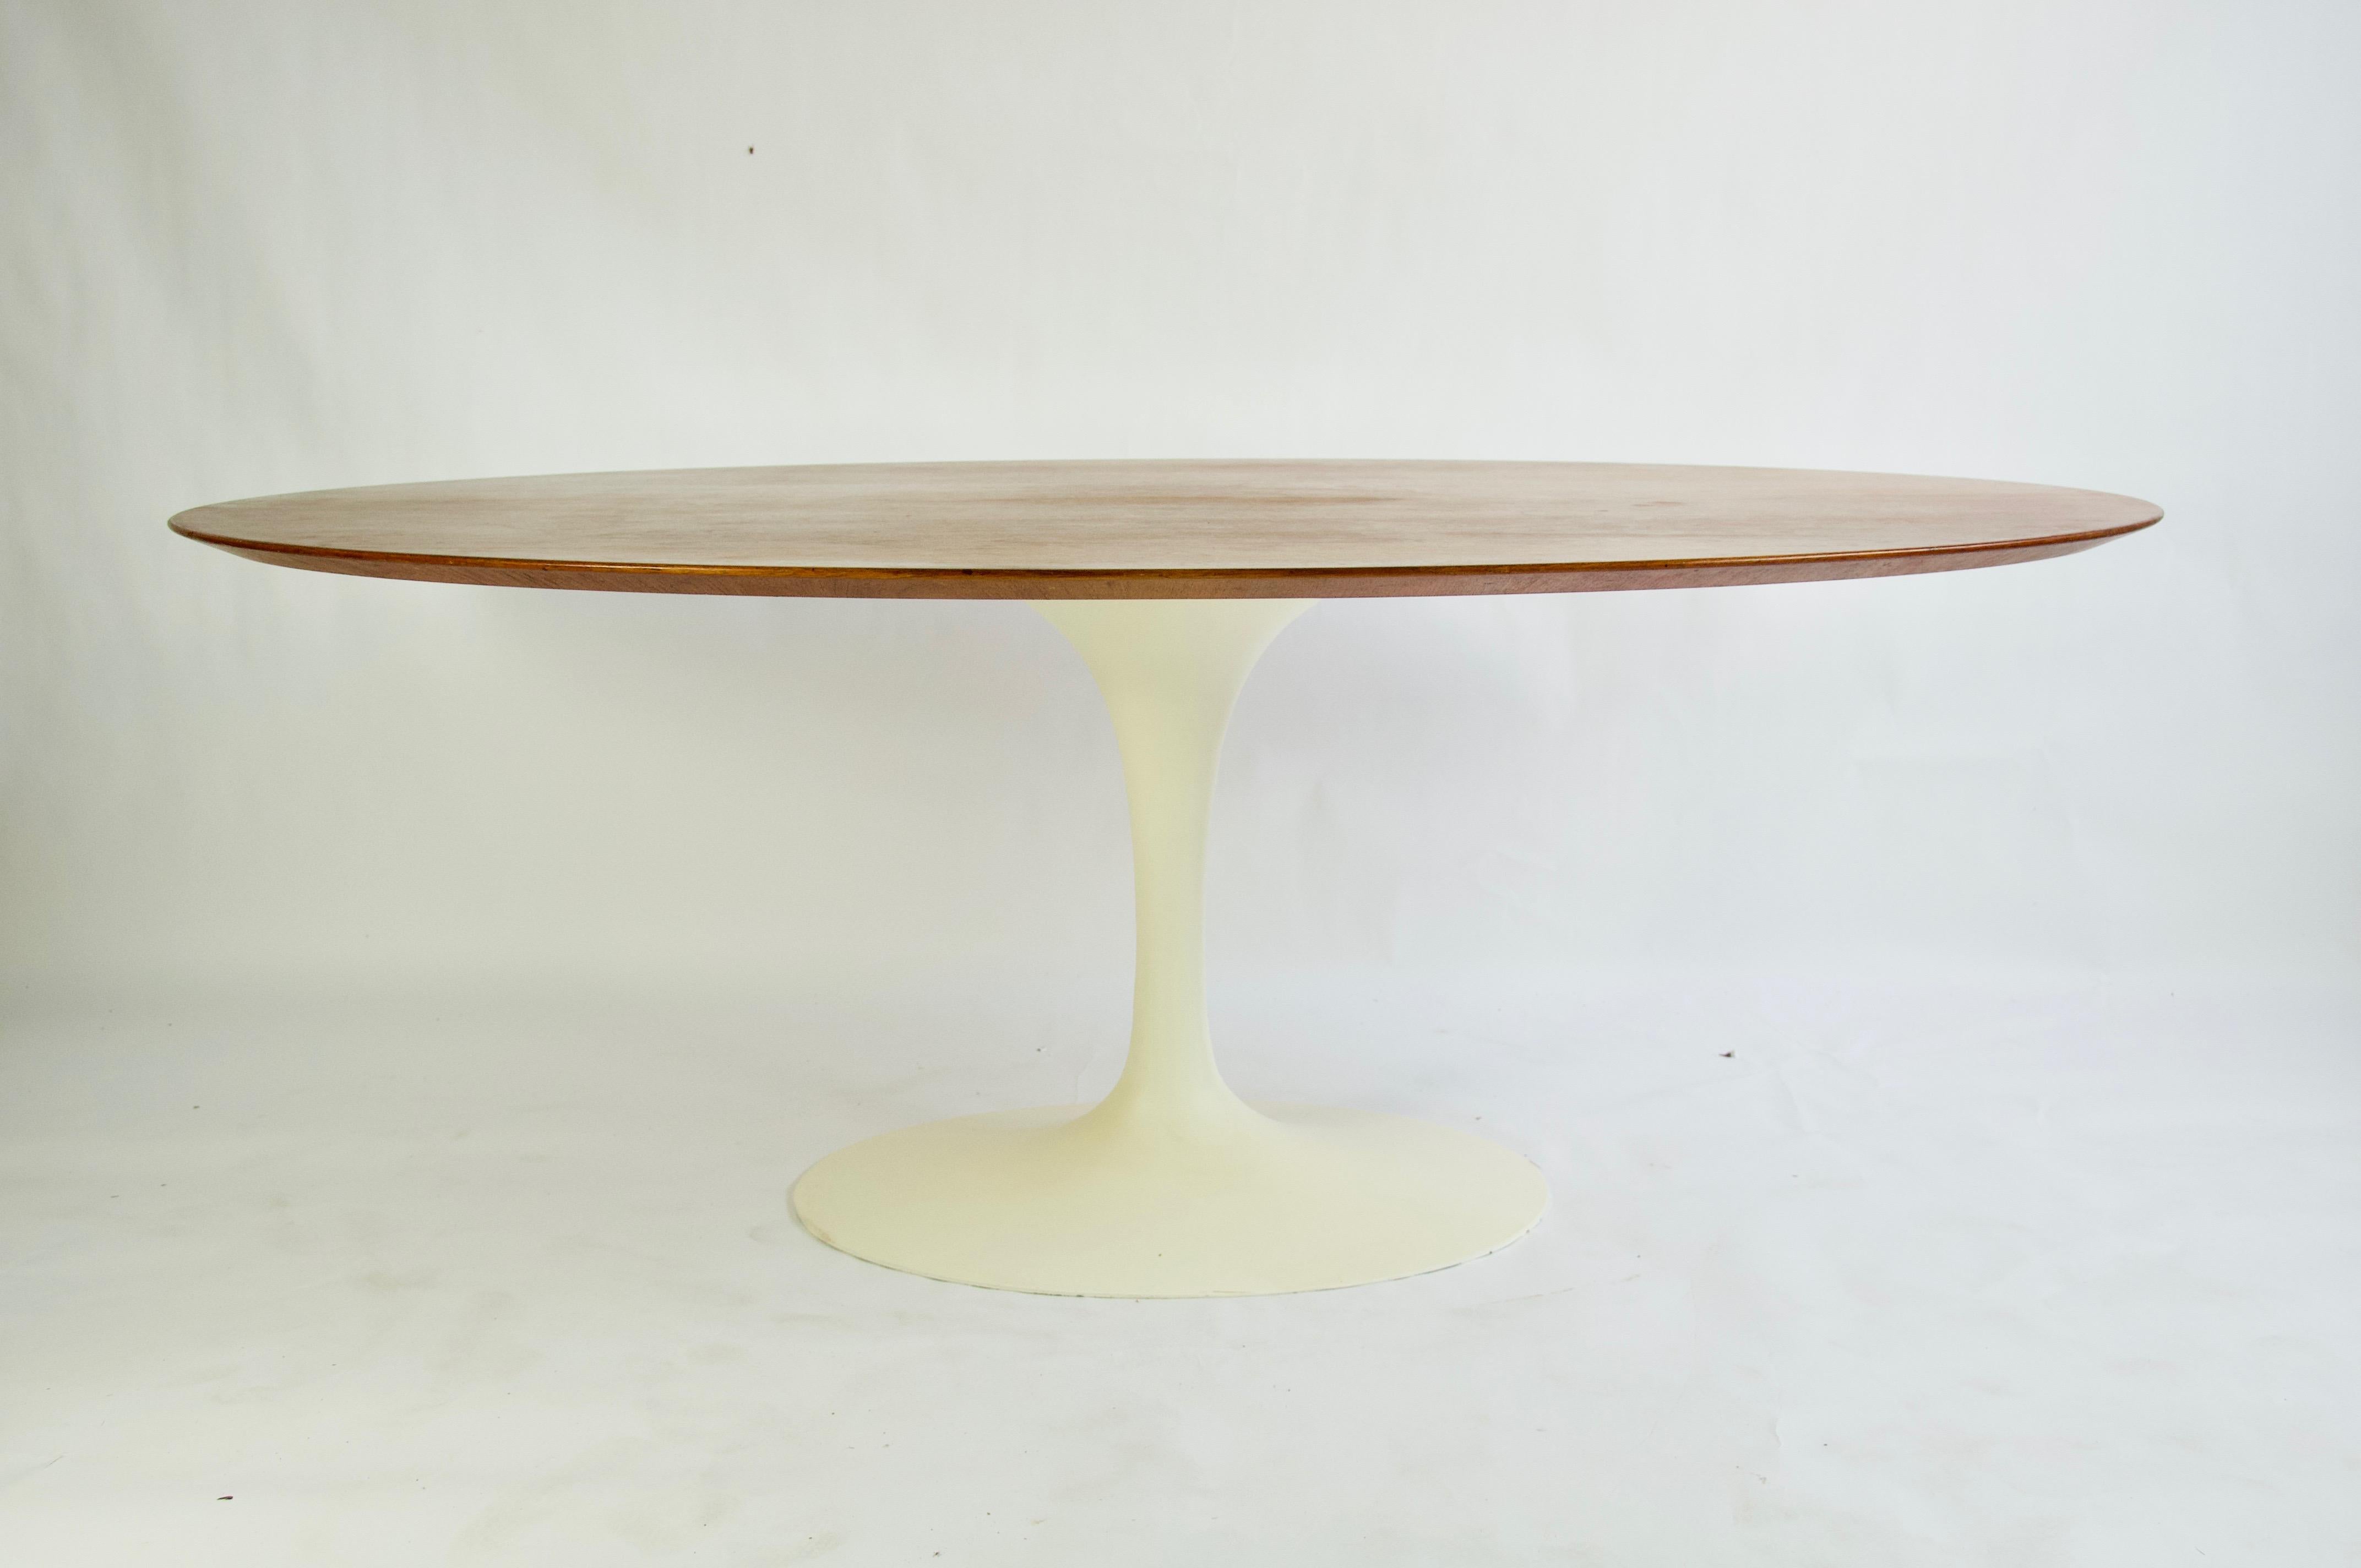 Vintage Eero Saarinen for Knoll Walnut Oval Dining Table.
Heavy cast base.


Table top is Currently being refinished in the original natural finish.